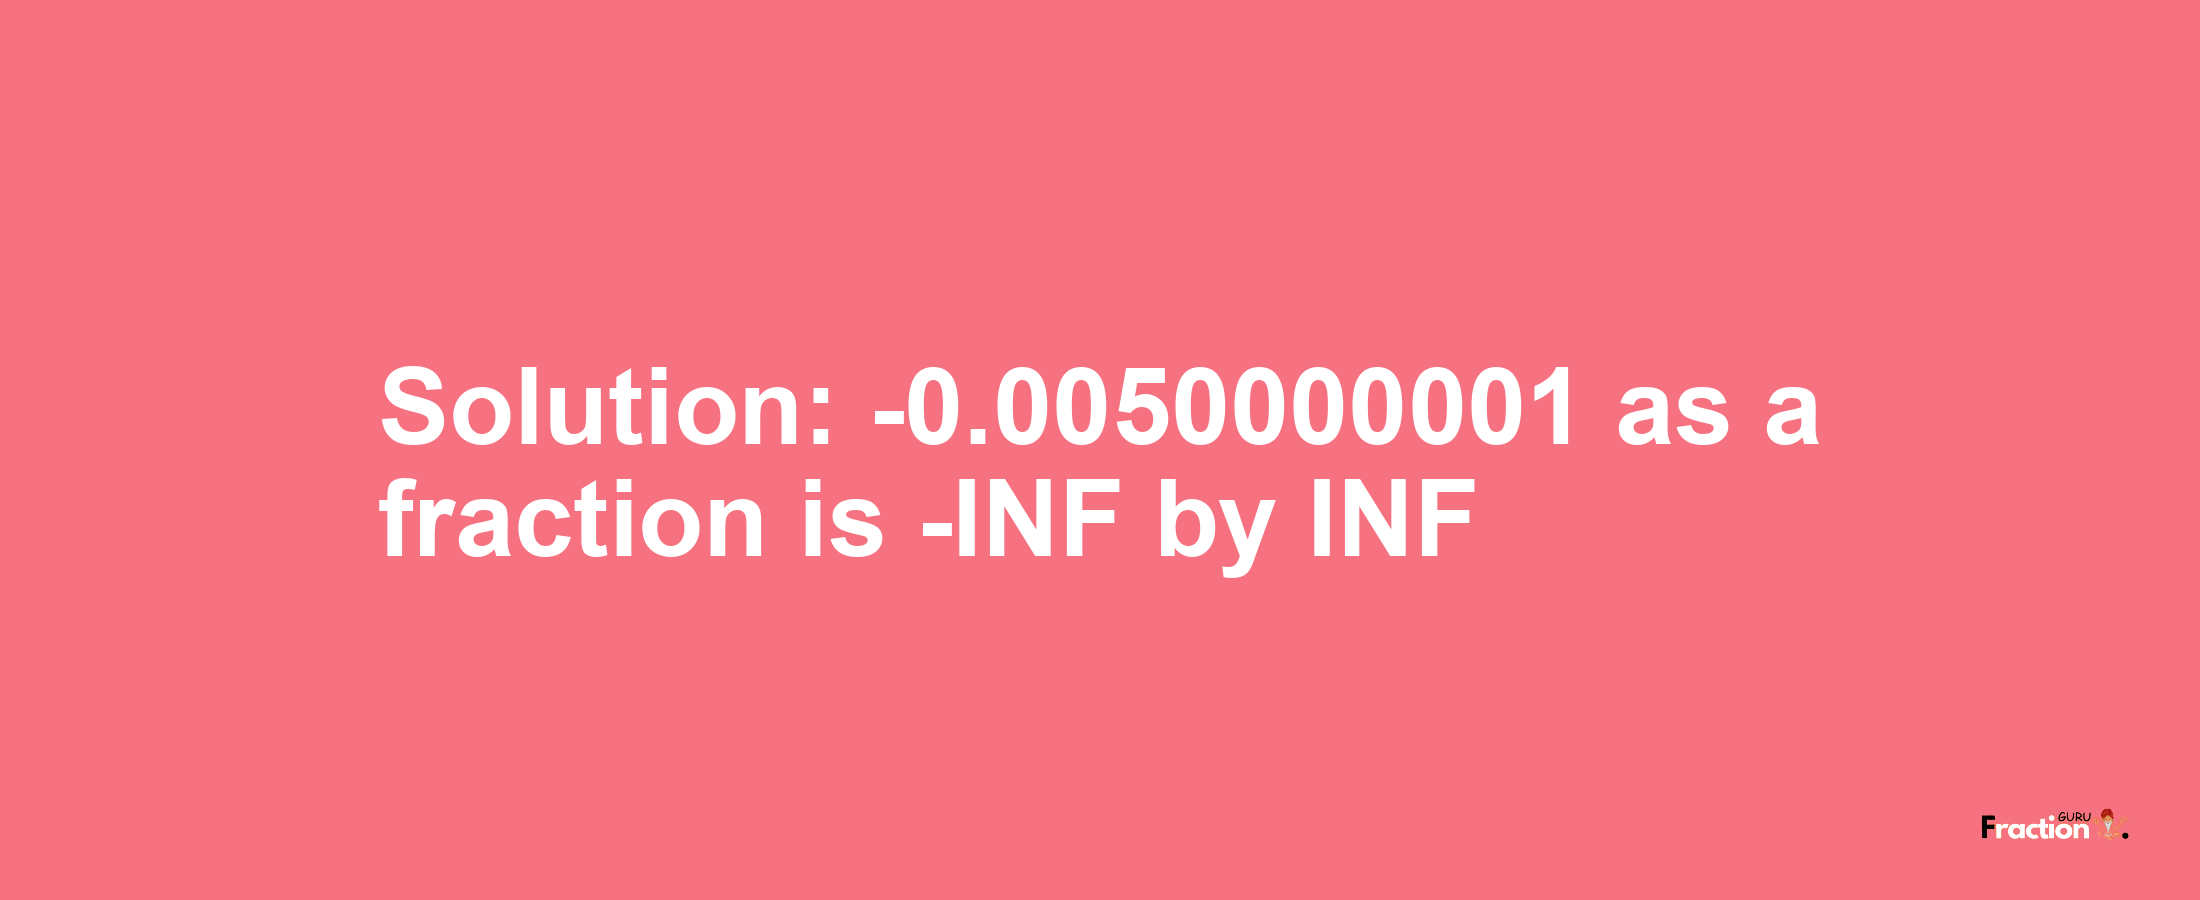 Solution:-0.0050000001 as a fraction is -INF/INF